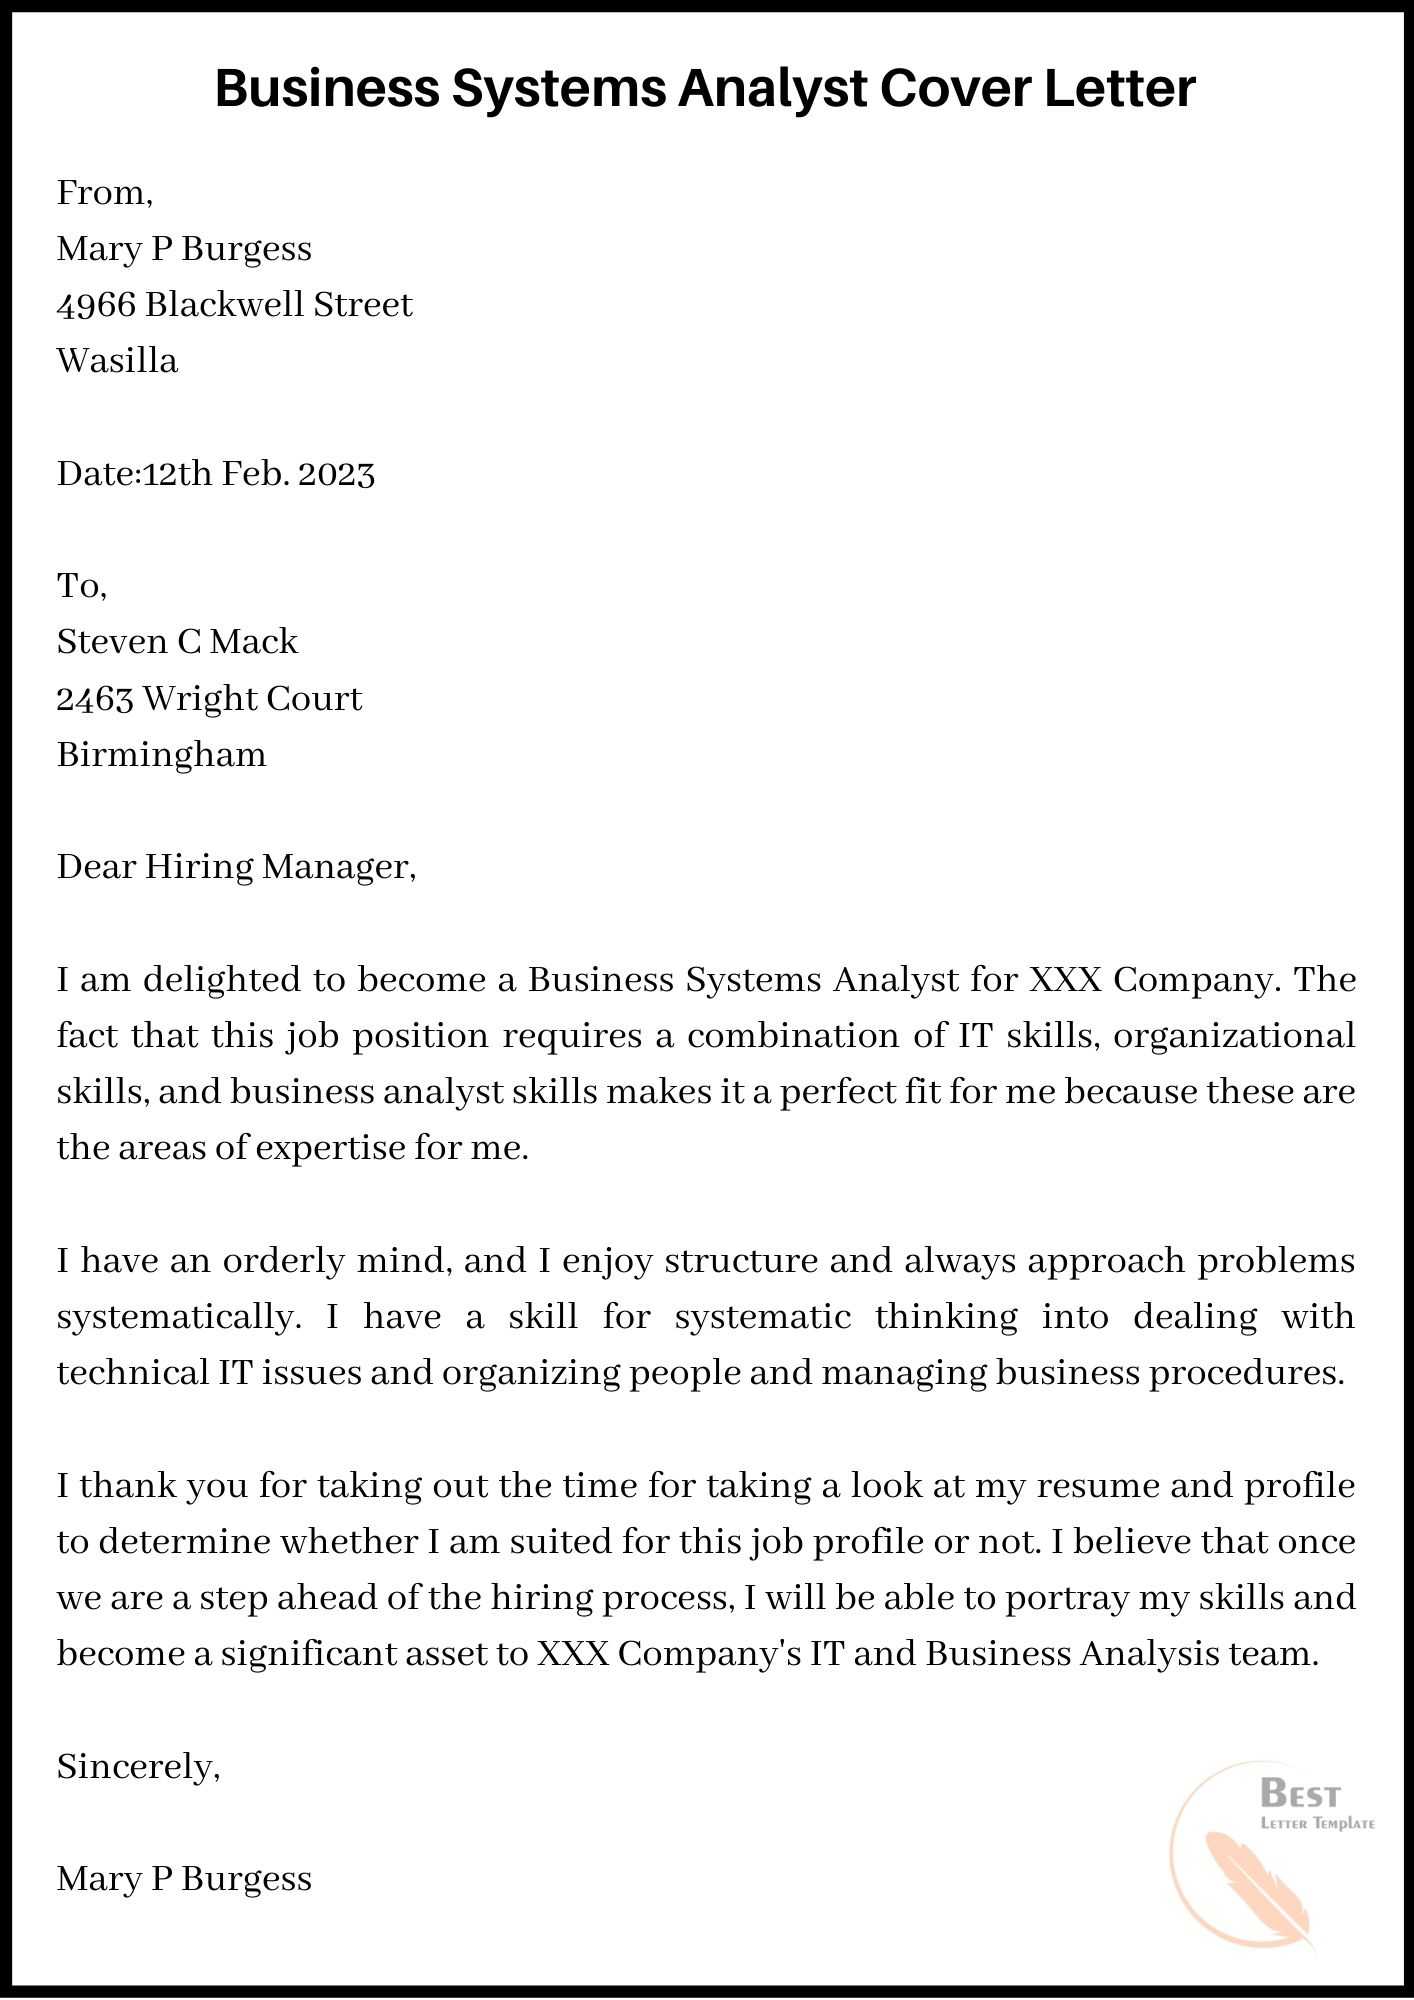 Sample Business Analyst Cover Letter Template with Examples